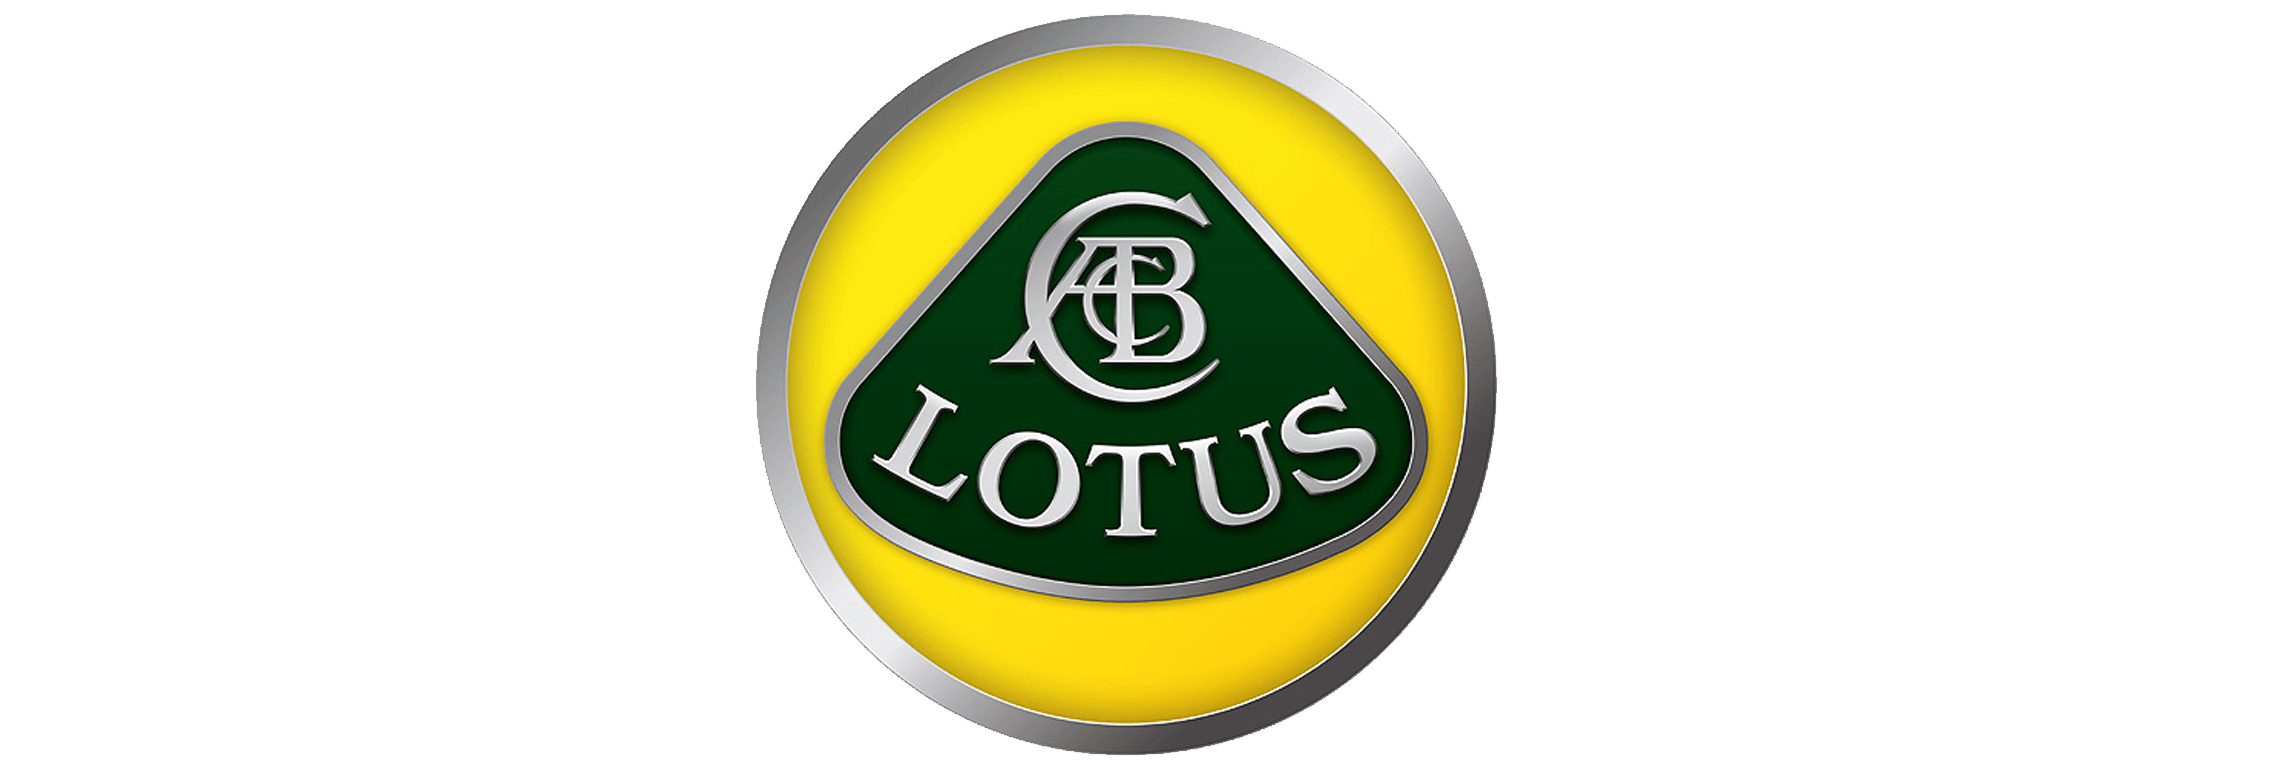 Lotus Car Logo - Lotus Logo Meaning and History, latest models | World Cars Brands